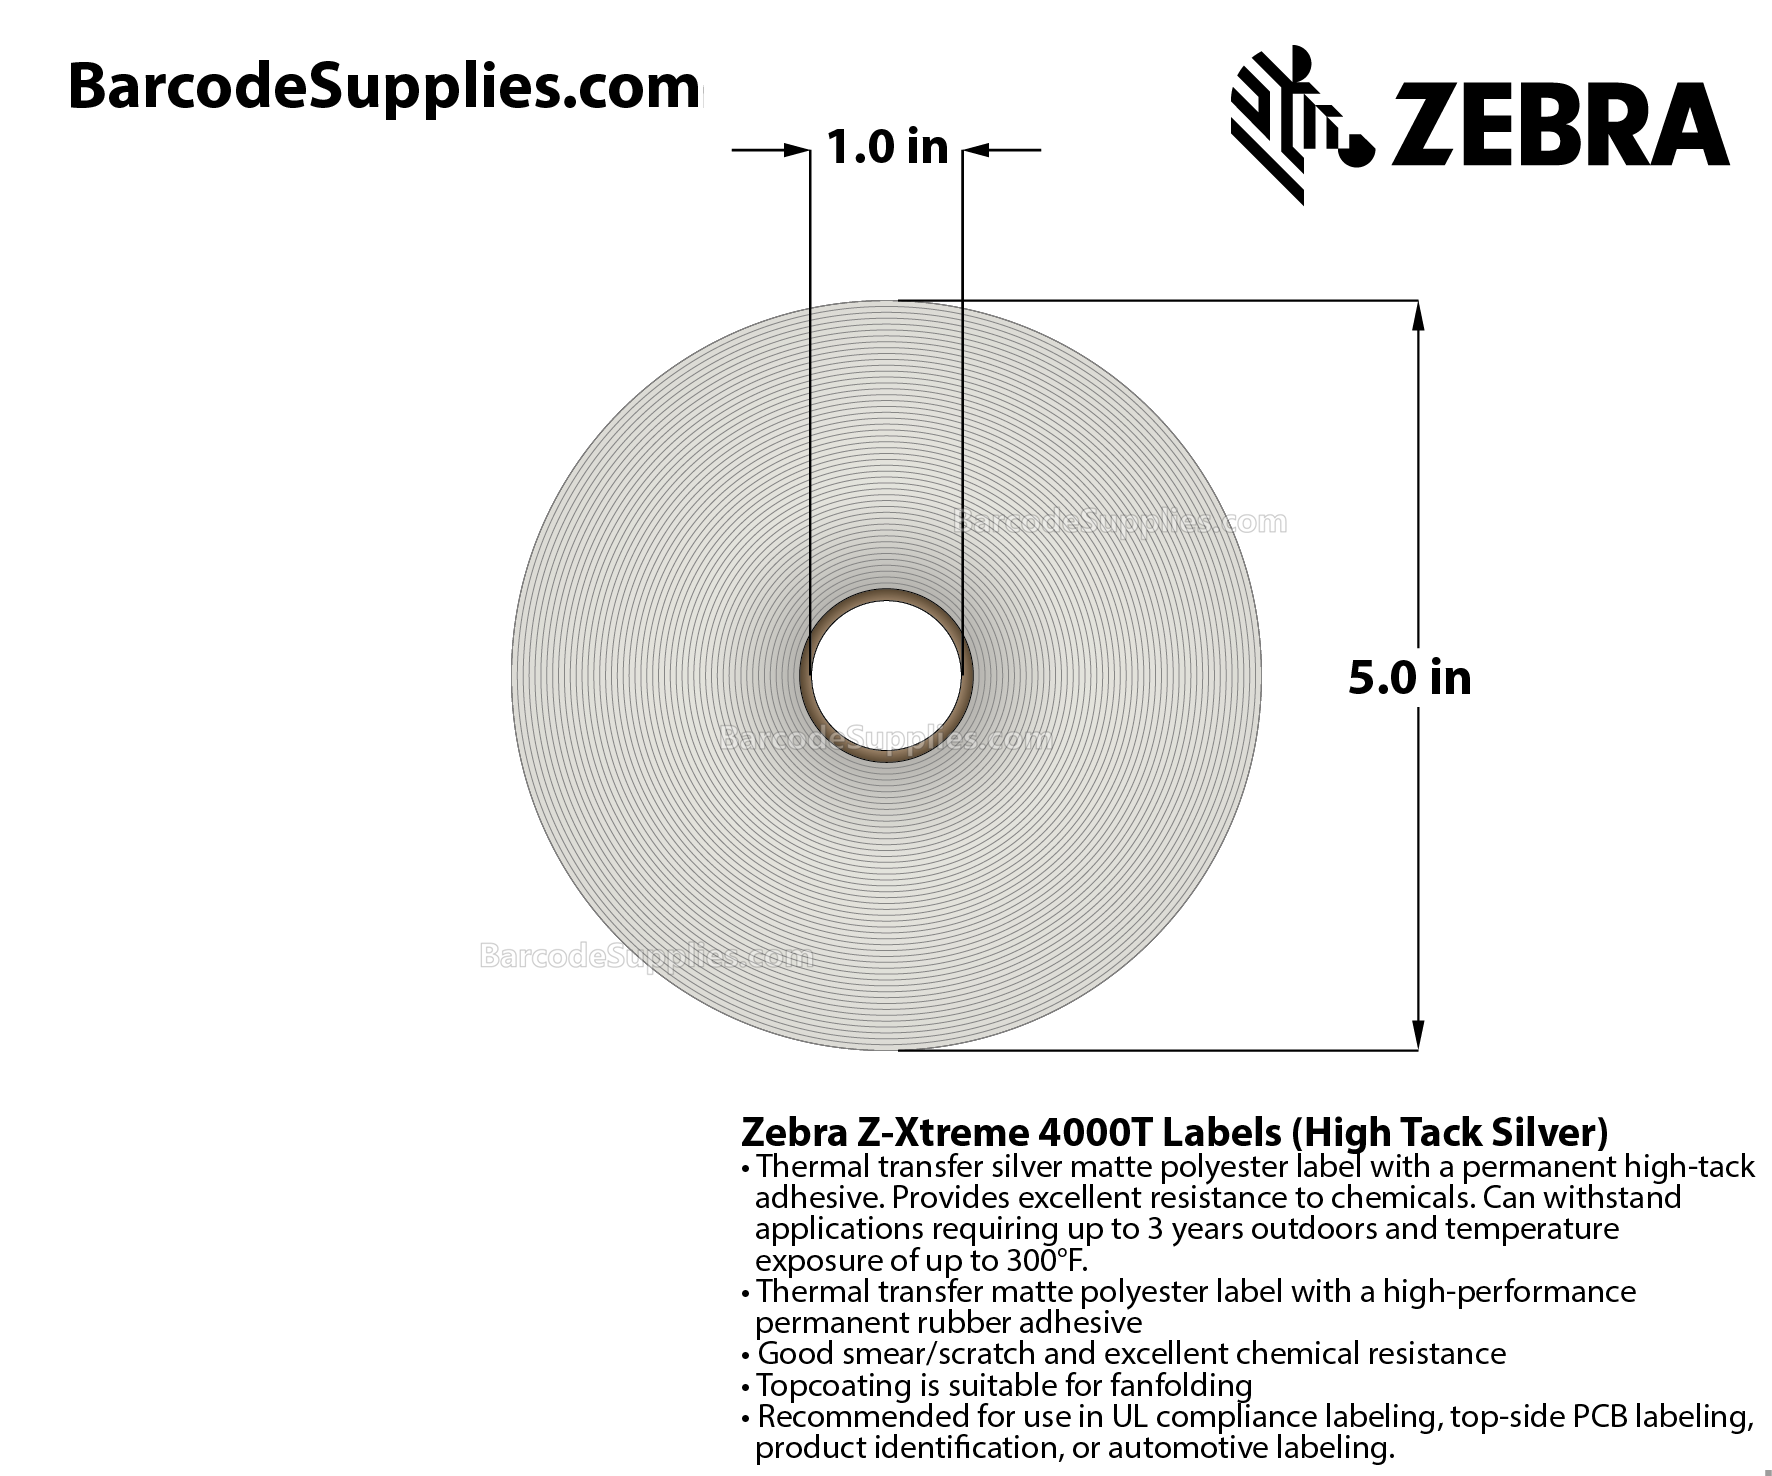 1 x 0.5 Thermal Transfer Silver Z-Xtreme 4000T High-Tack Silver (3-Across) Labels With High-tack Adhesive - Perforated - 5001 Labels Per Roll - Carton Of 1 Rolls - 5001 Labels Total - MPN: 10023169